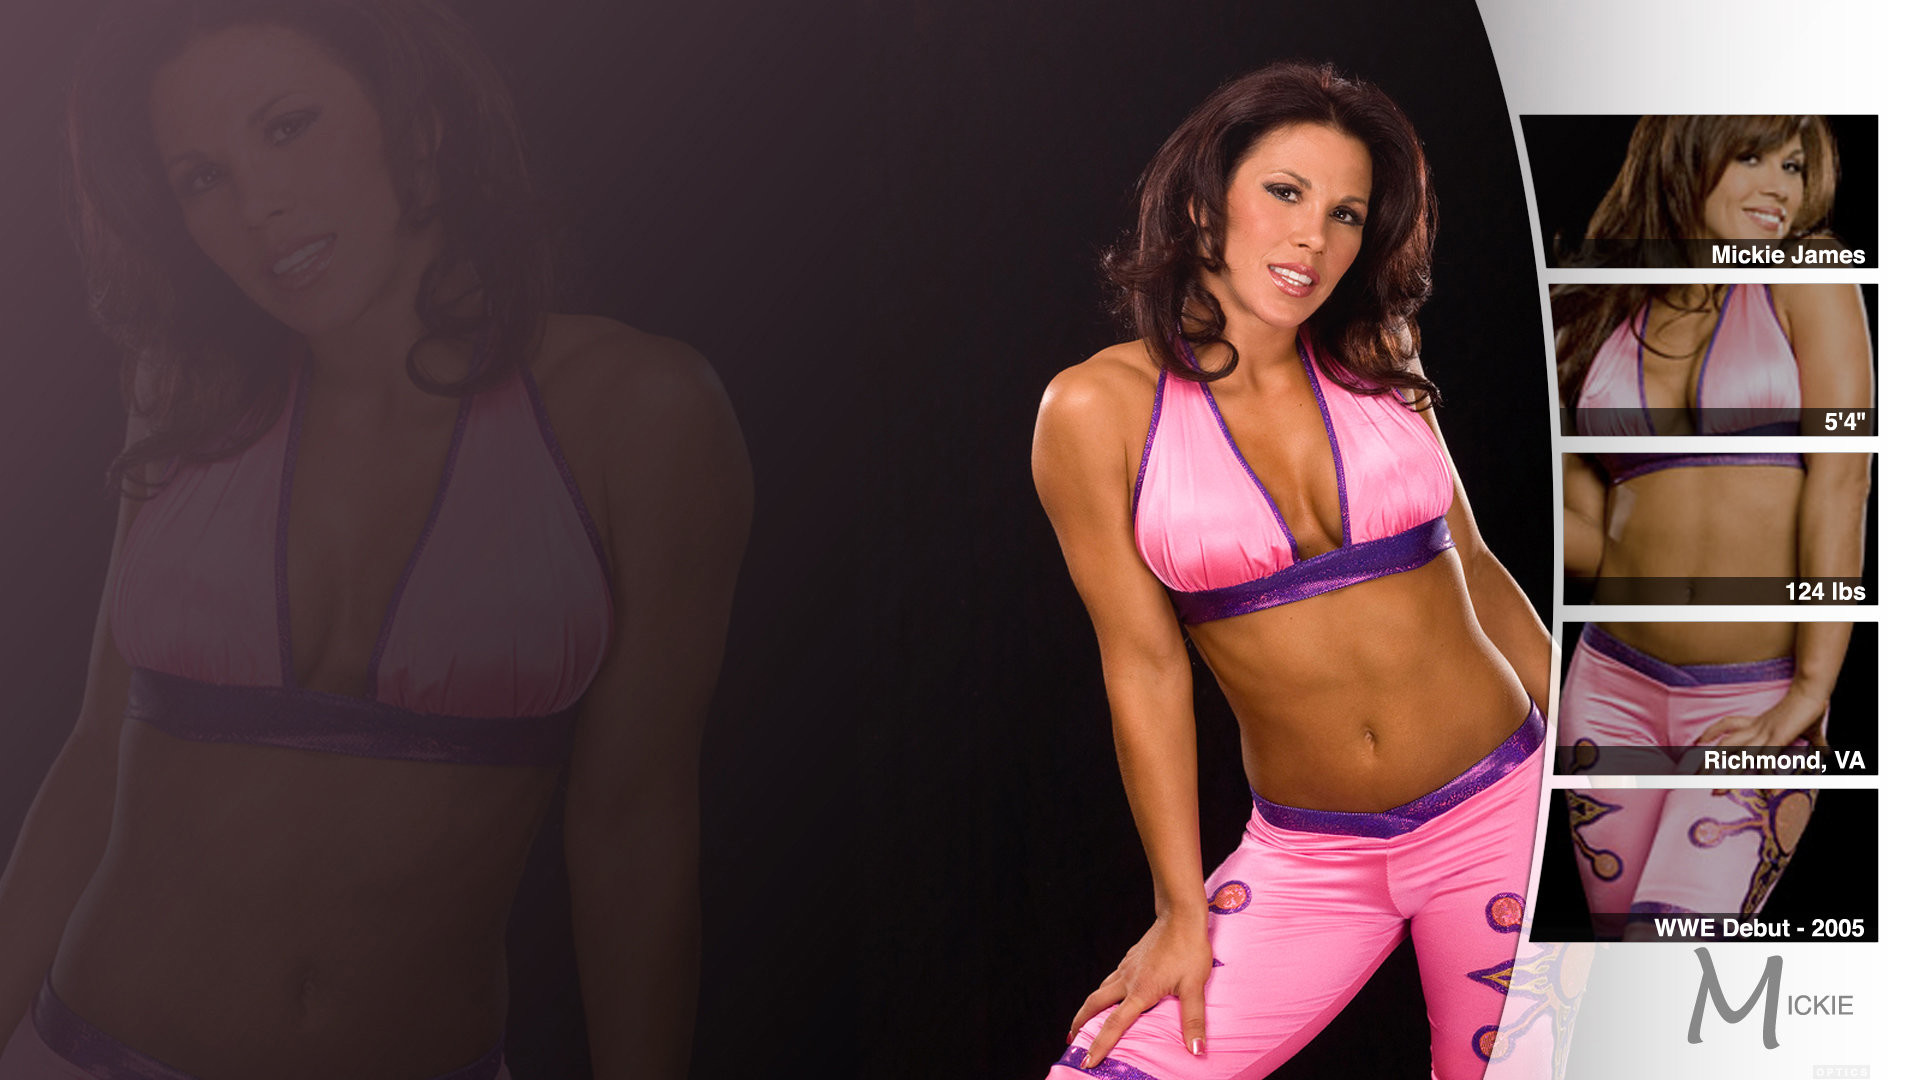 1920x1080 Mickie James - WWE Wallpaper by 0PT1C5 ...